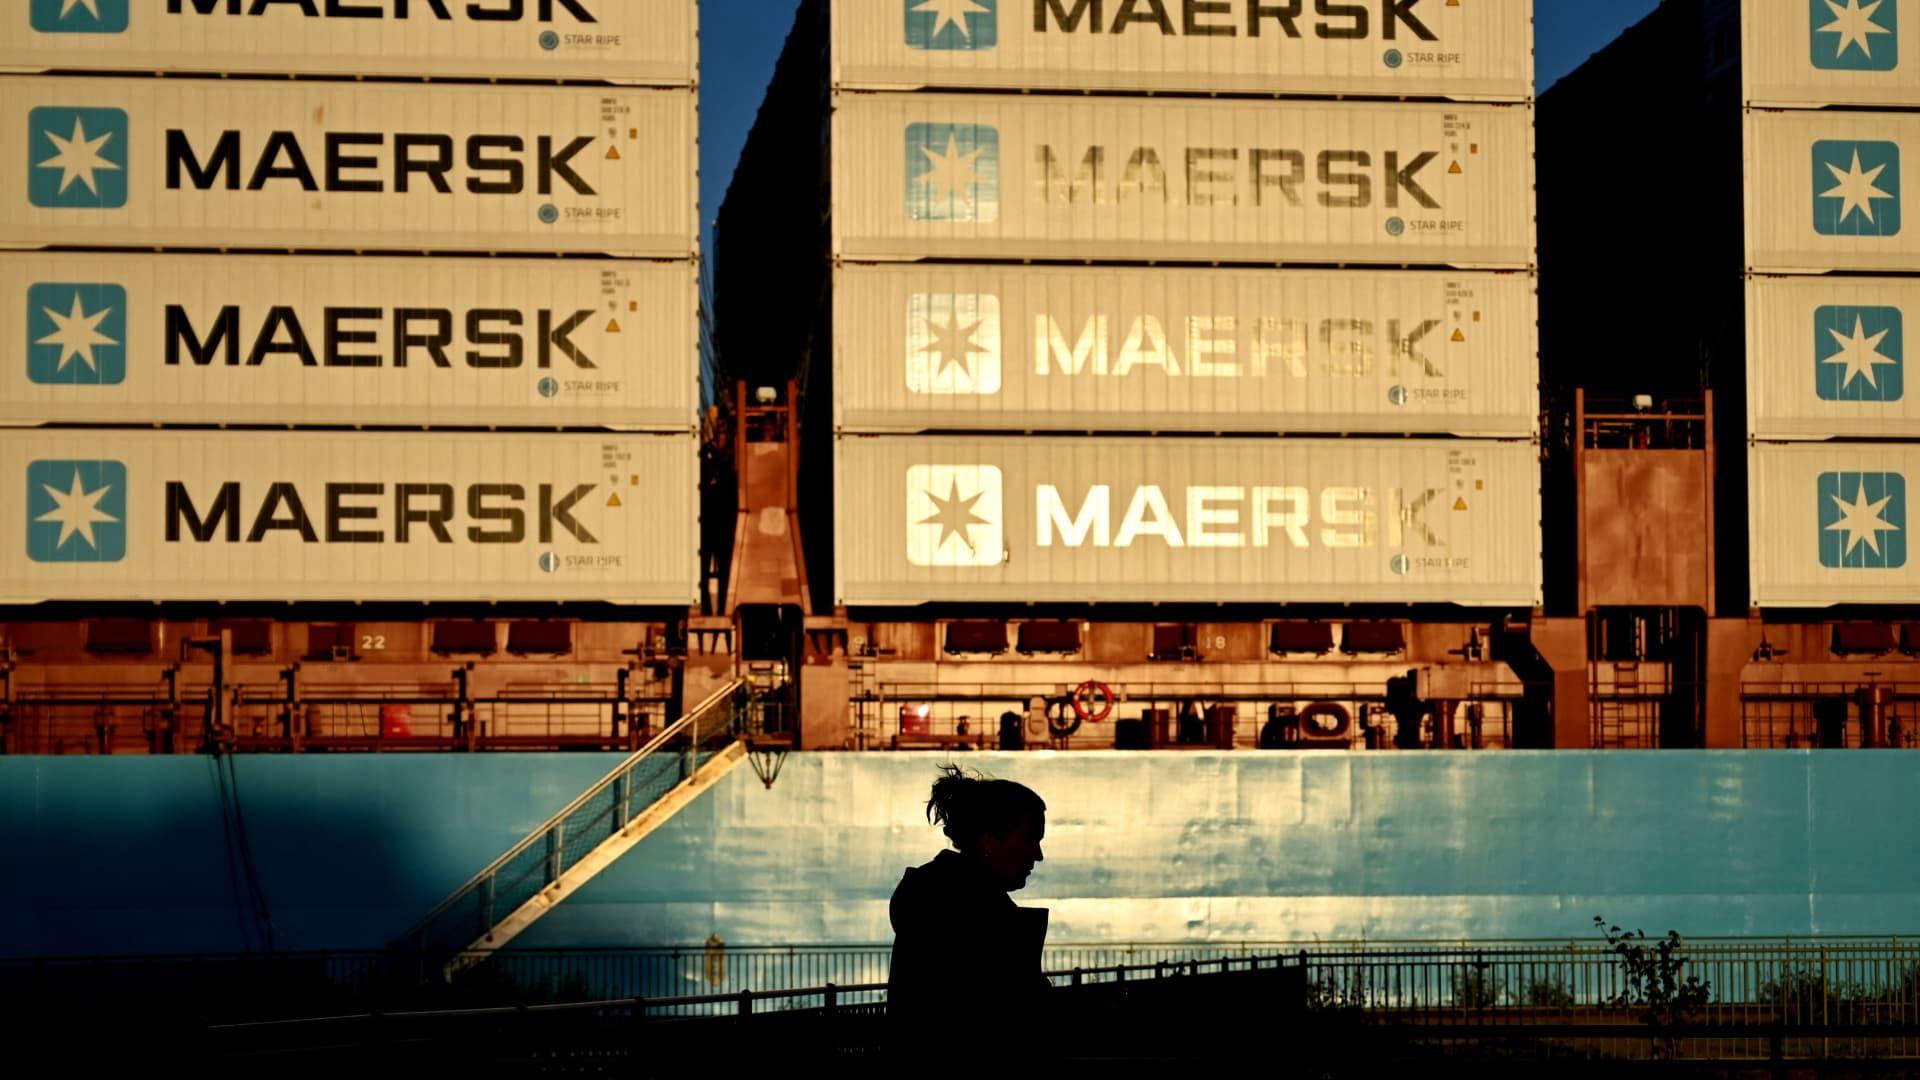 Shipping giant Maersk is seeing tentative signs of a bounce back in global trade